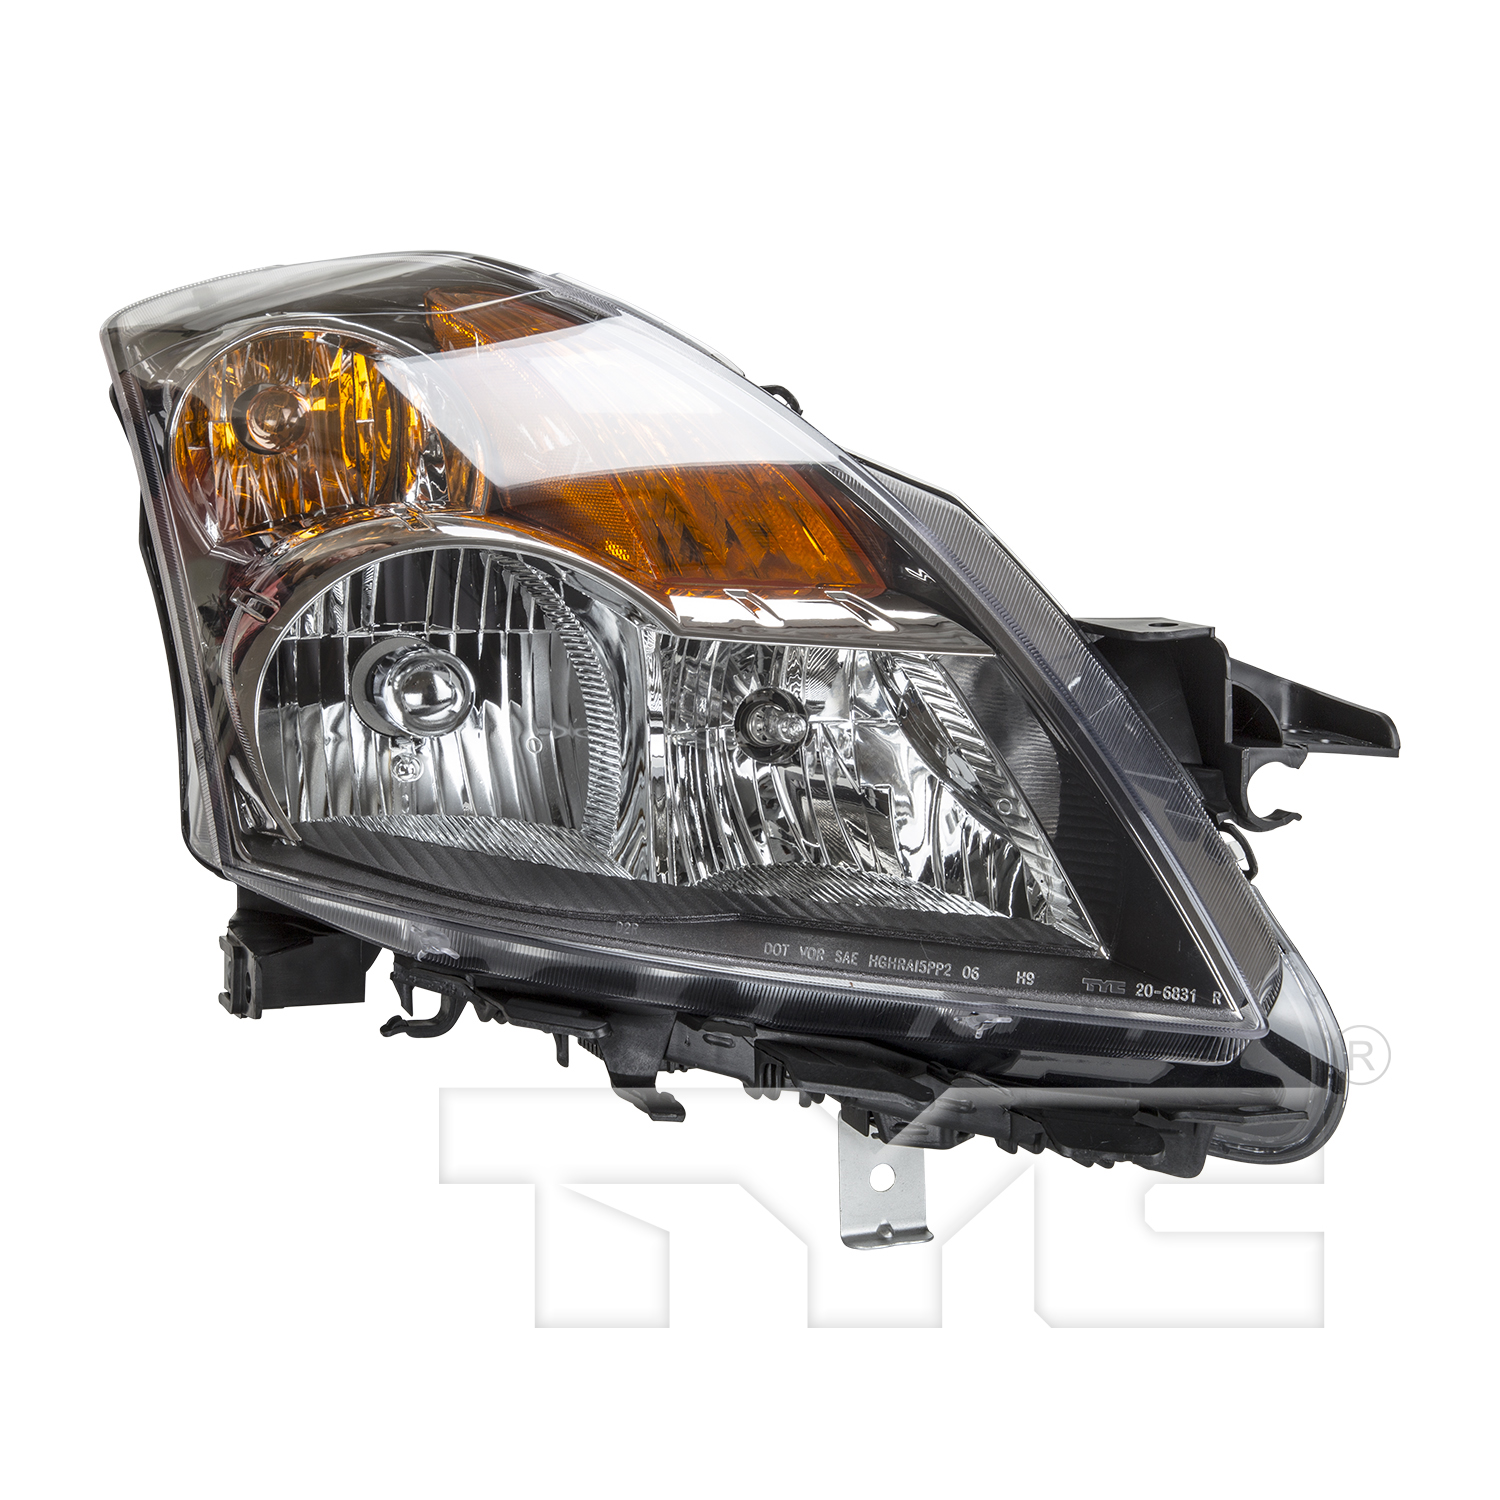 Aftermarket HEADLIGHTS for NISSAN - ALTIMA, ALTIMA,08-09,RT Headlamp assy composite